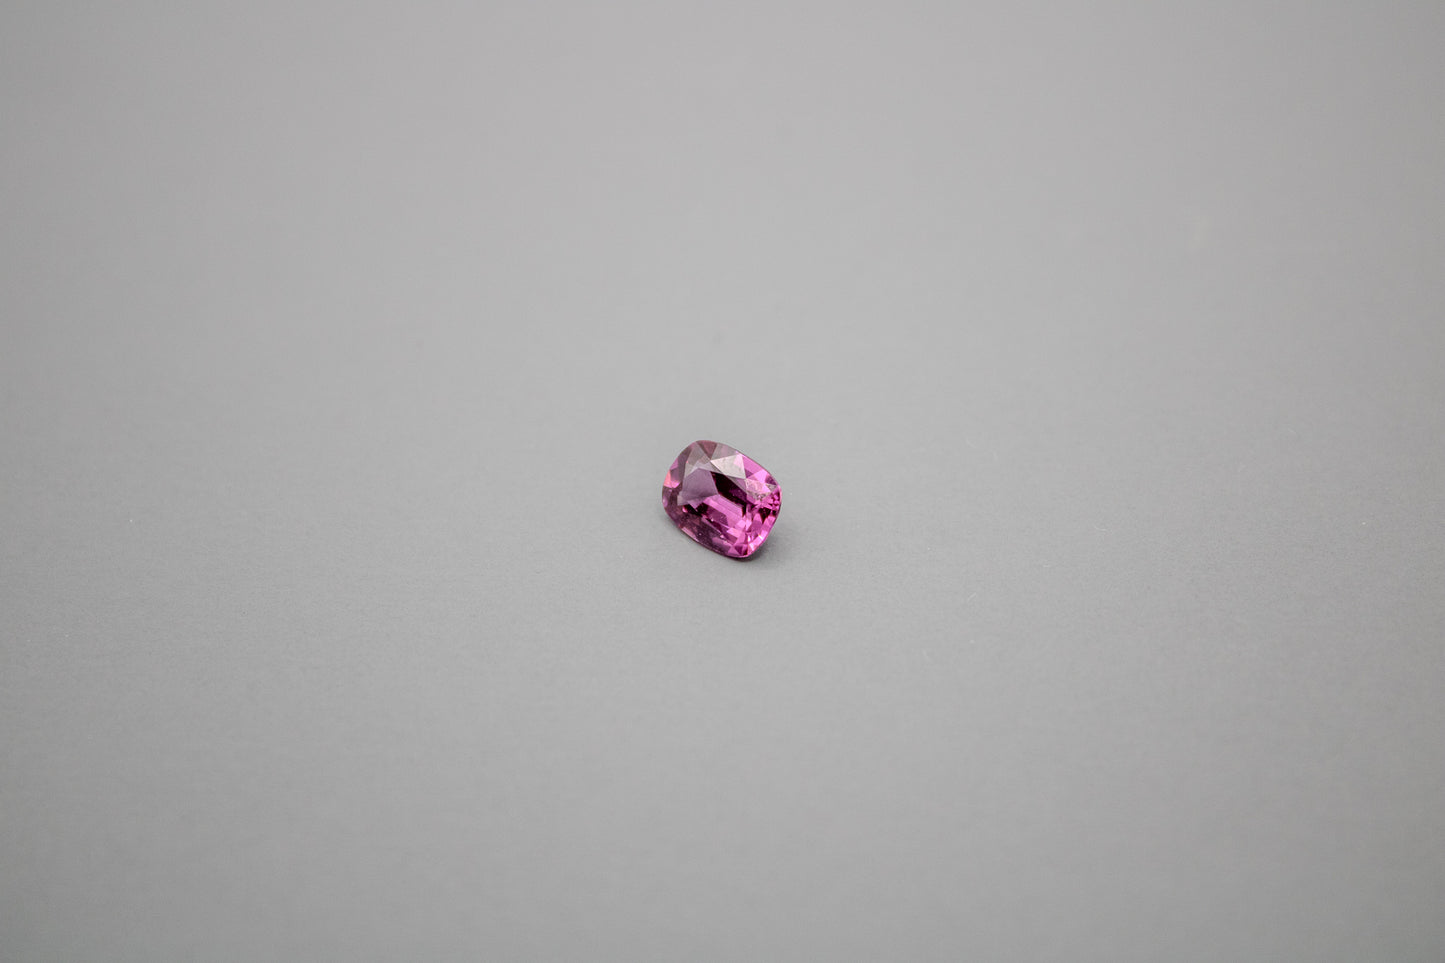 Pink Spinel - 1,13 cts